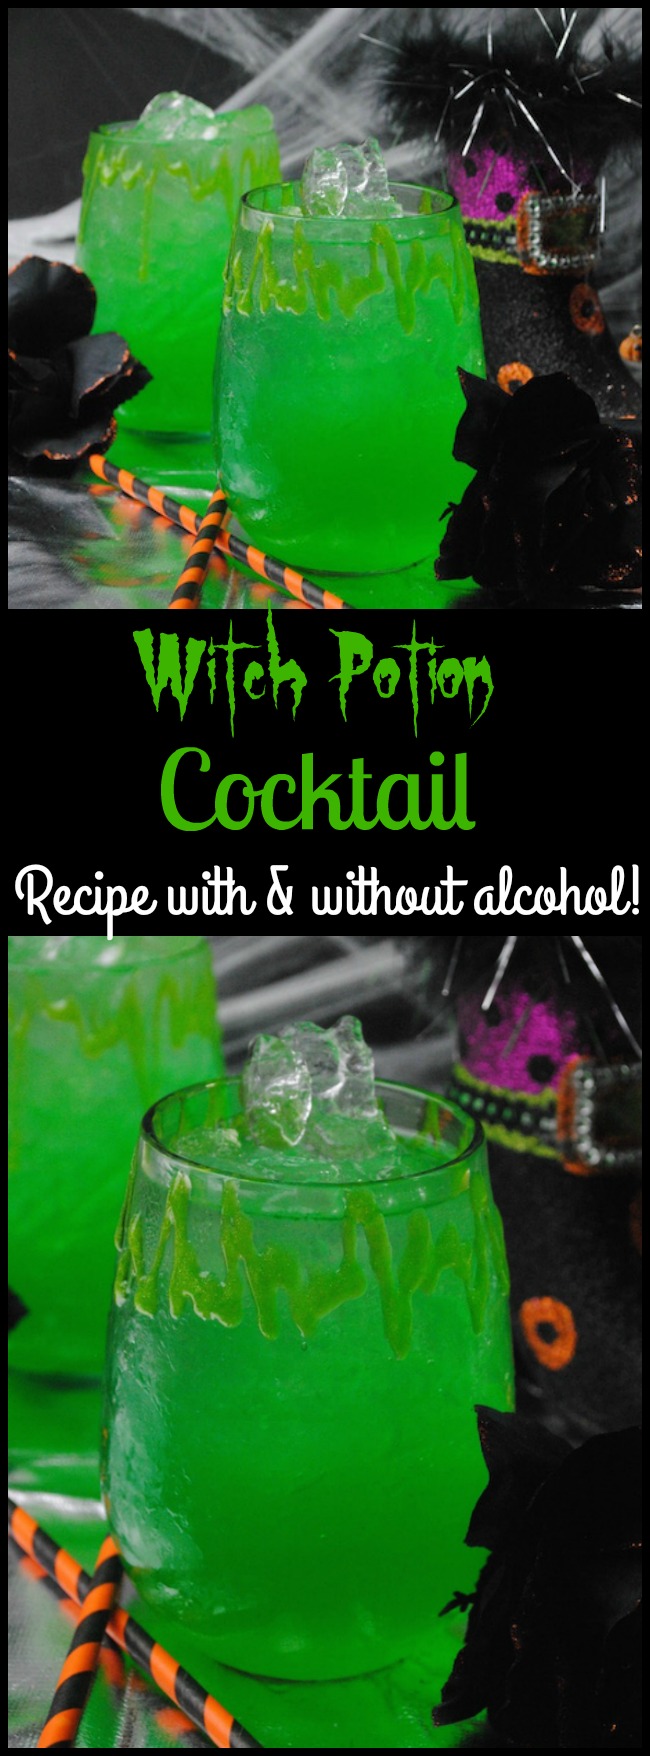 Witch Potion Cocktail Recipe with a non-alcoholic option.